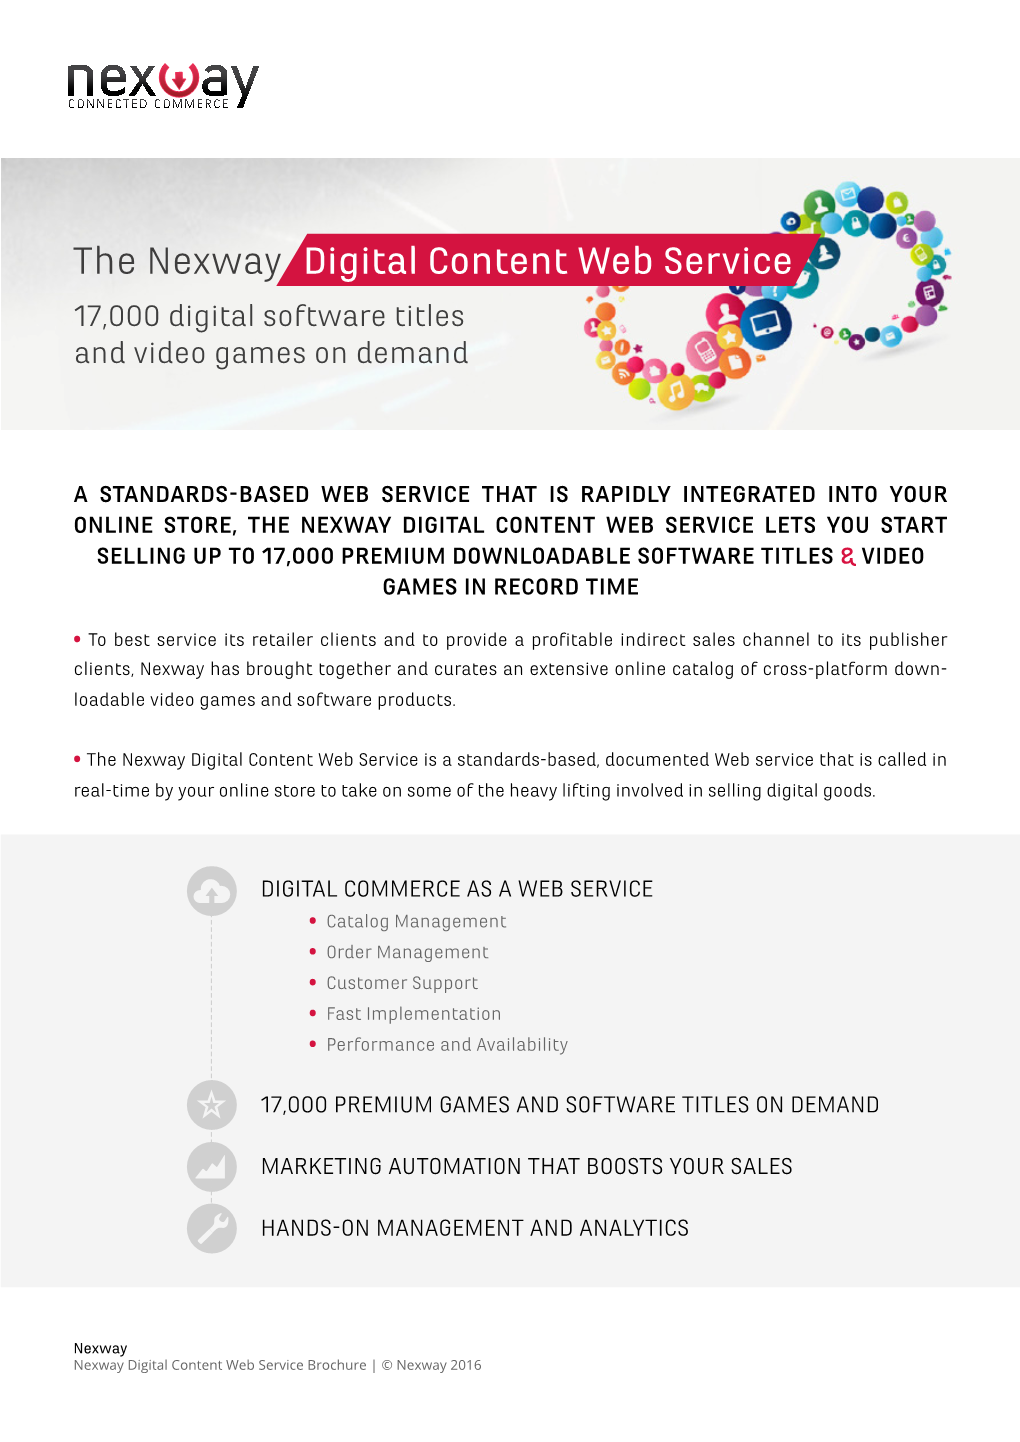 The Nexway Digital Content Web Service 17,000 Digital Software Titles and Video Games on Demand